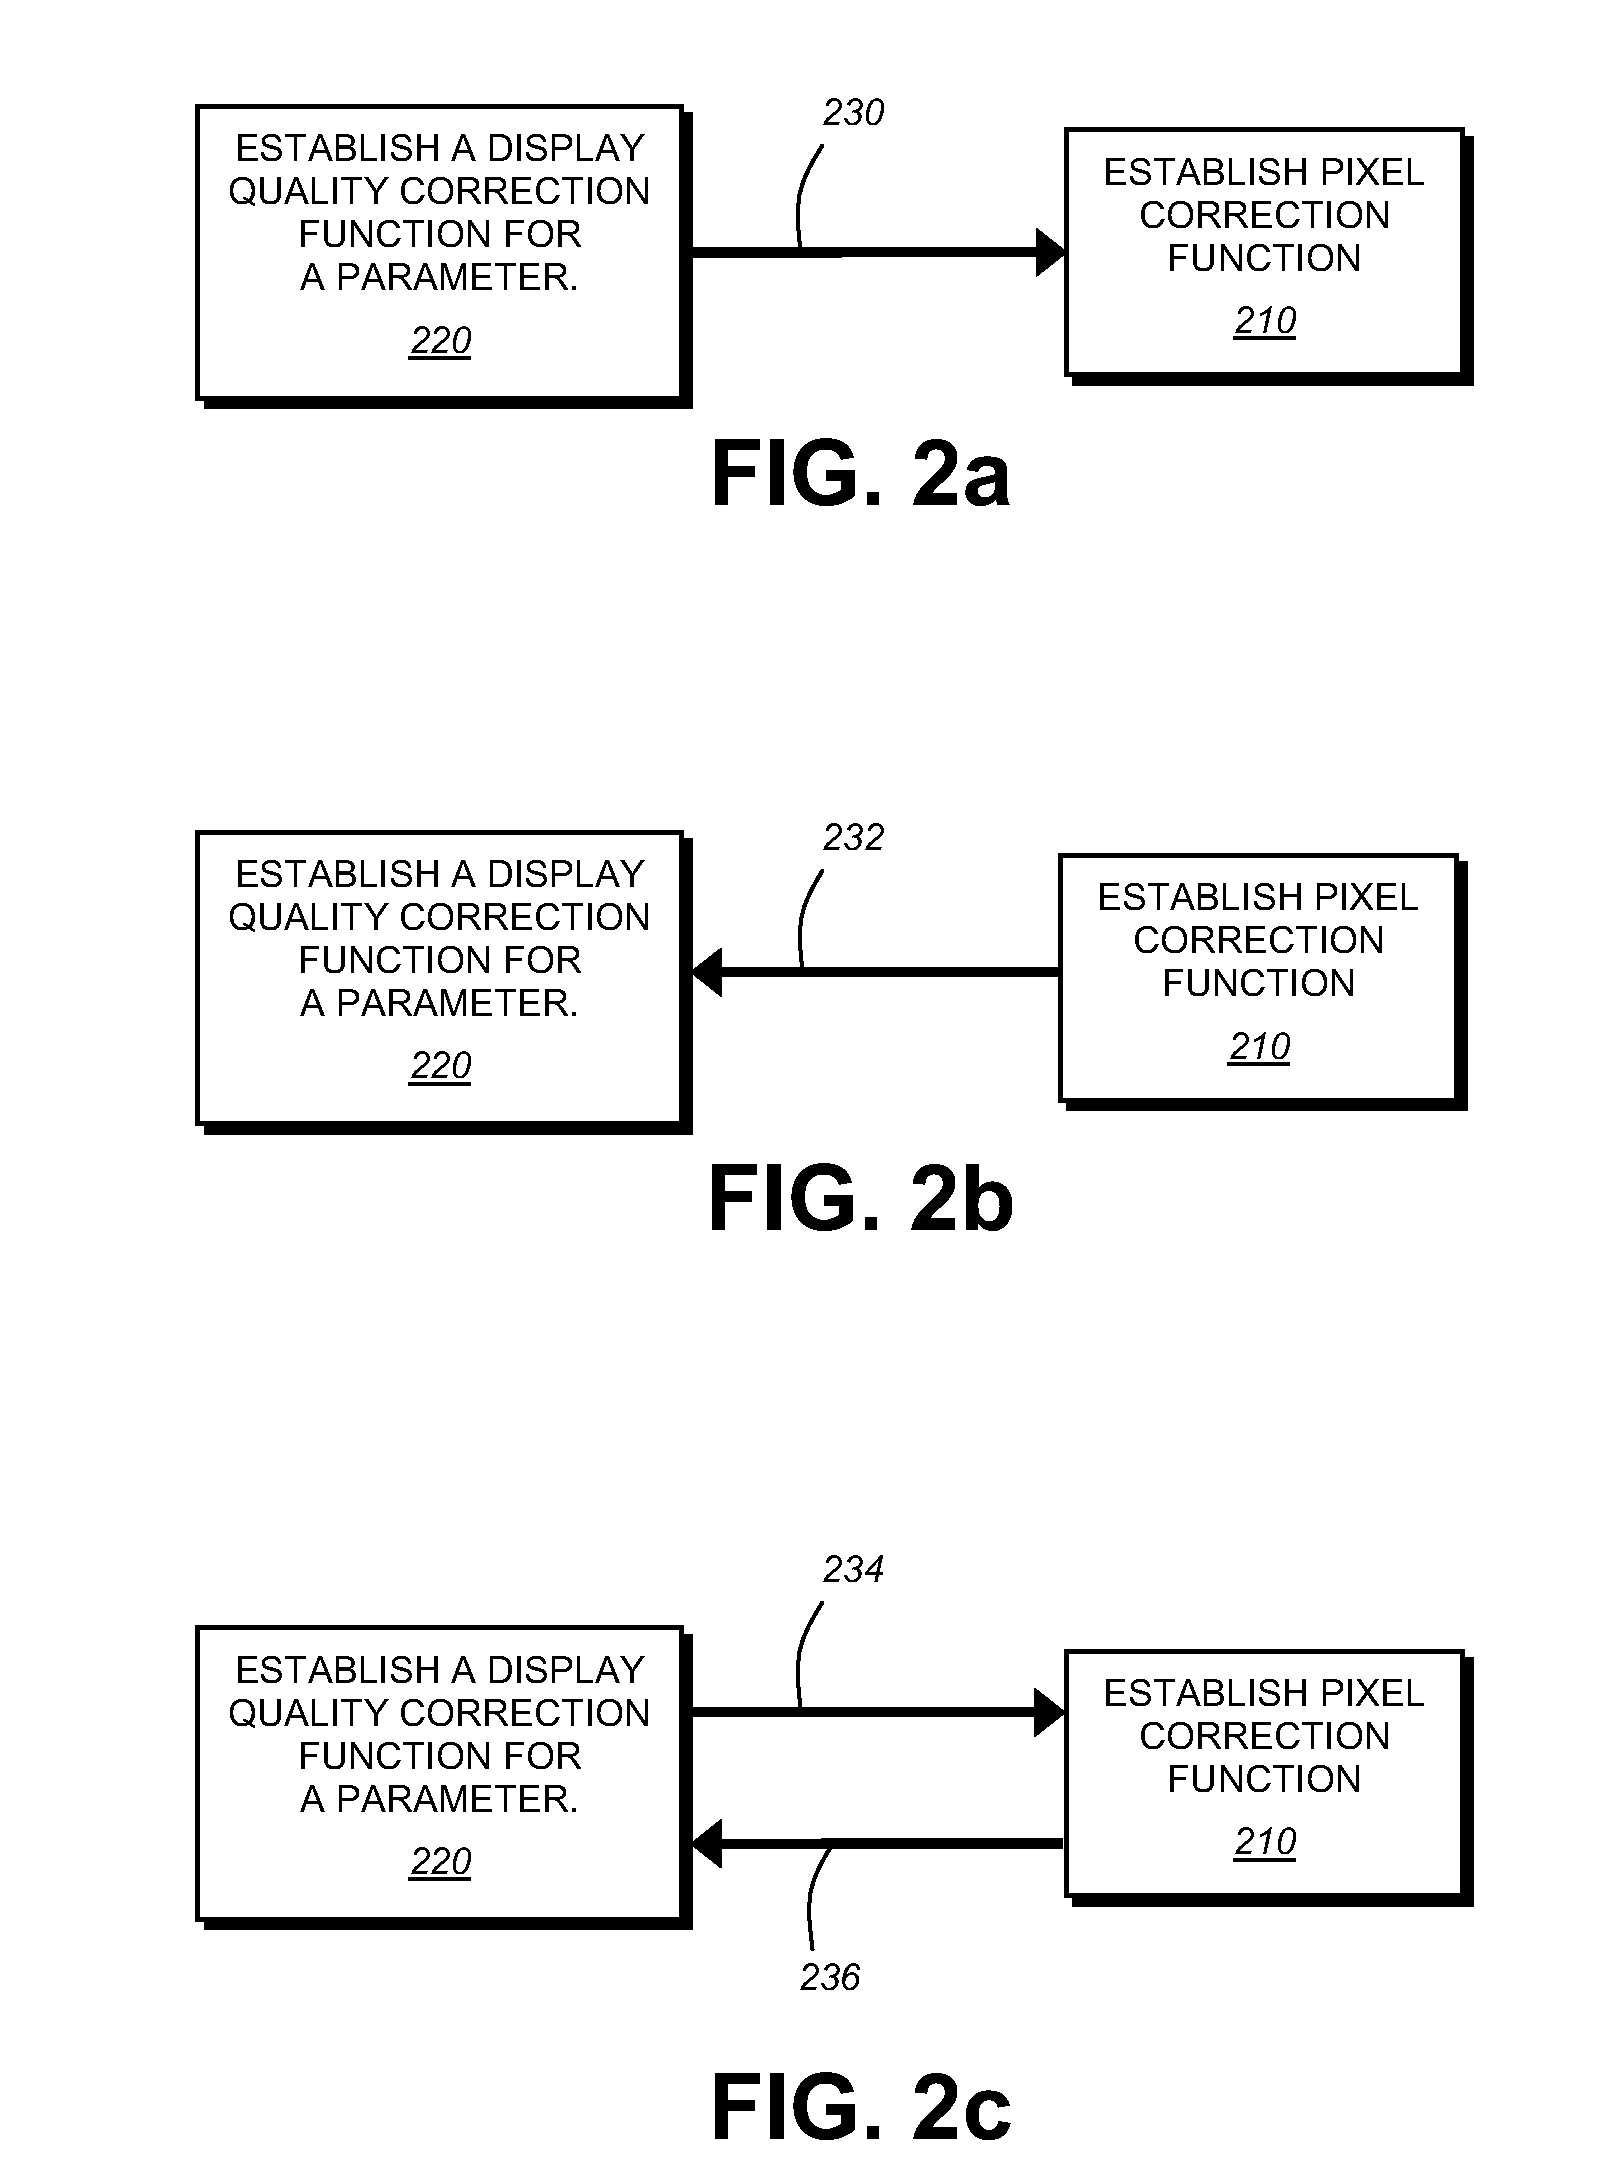 System and method for providing improved display quality by display adjustment and image processing using optical feedback